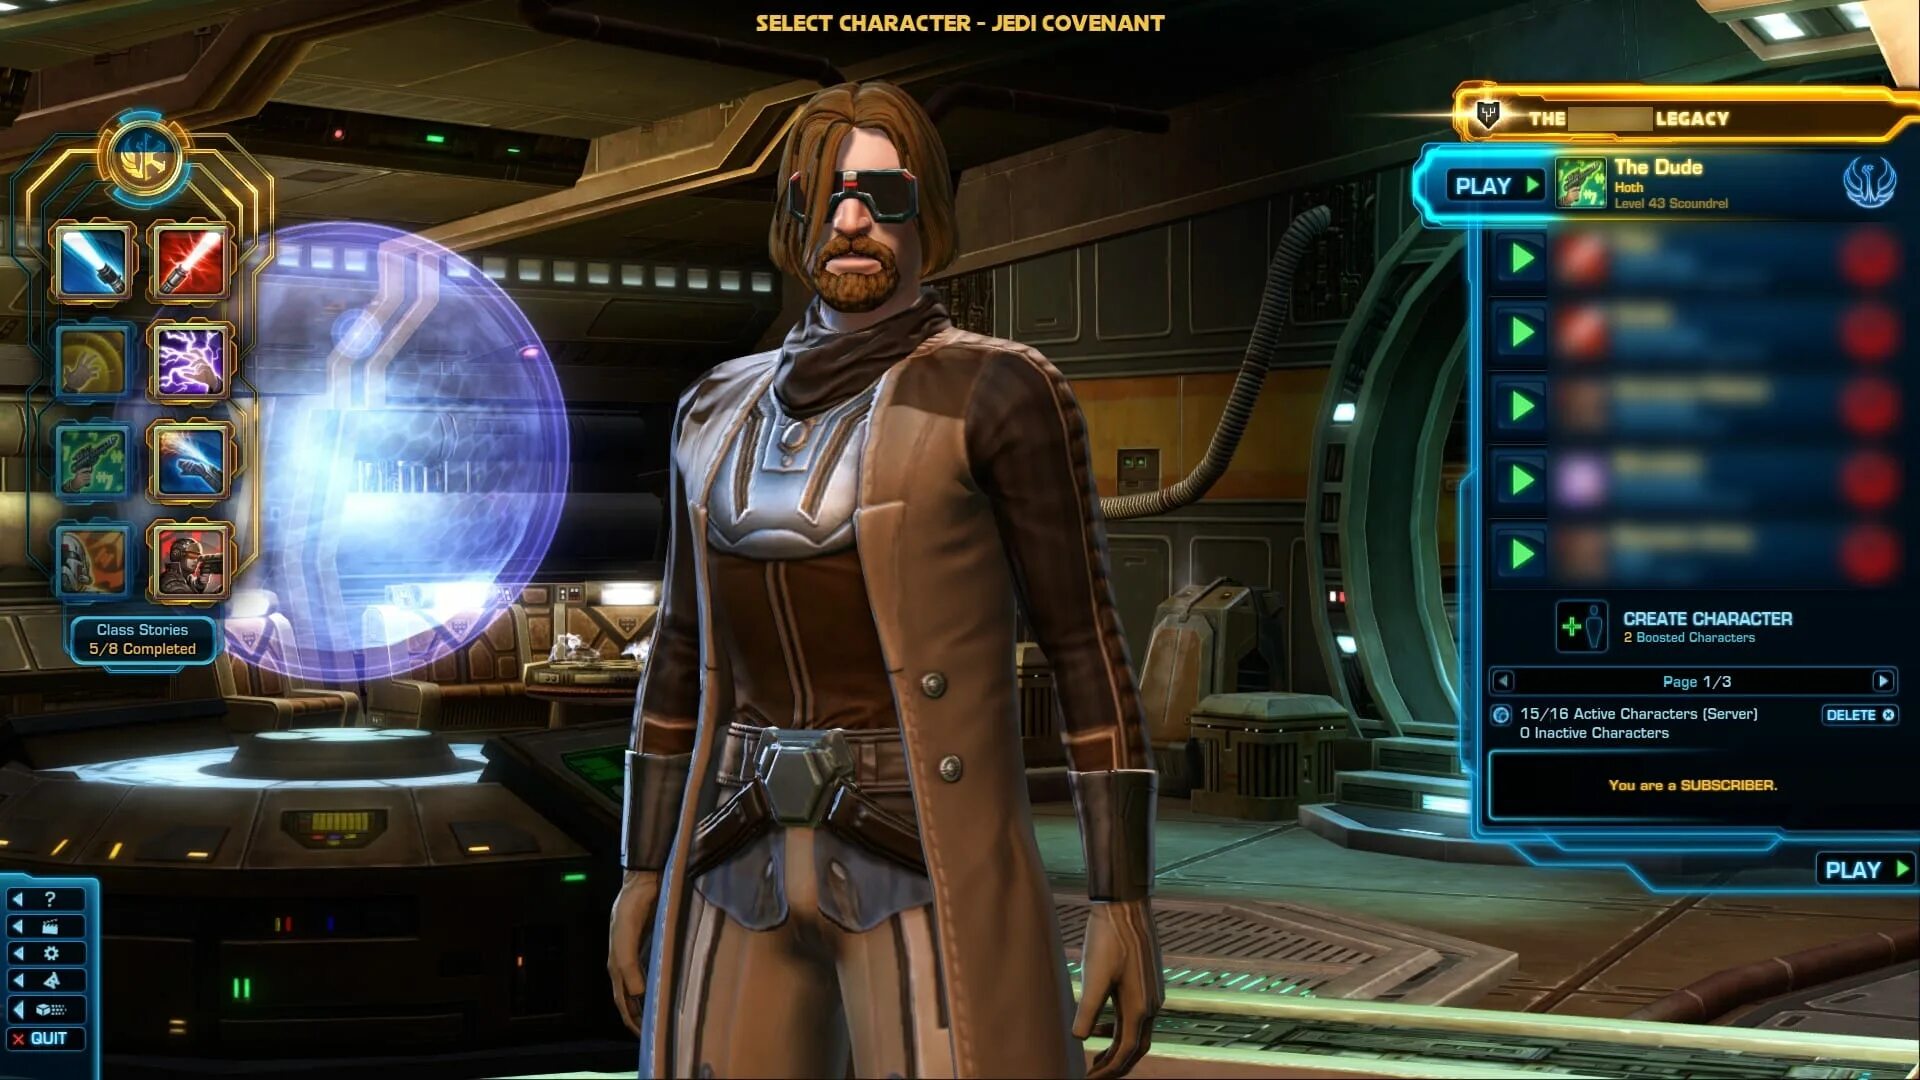 SWTOR Гамора. SWTOR сюжет. SWTOR characters. SWTOR профессии. Game update us